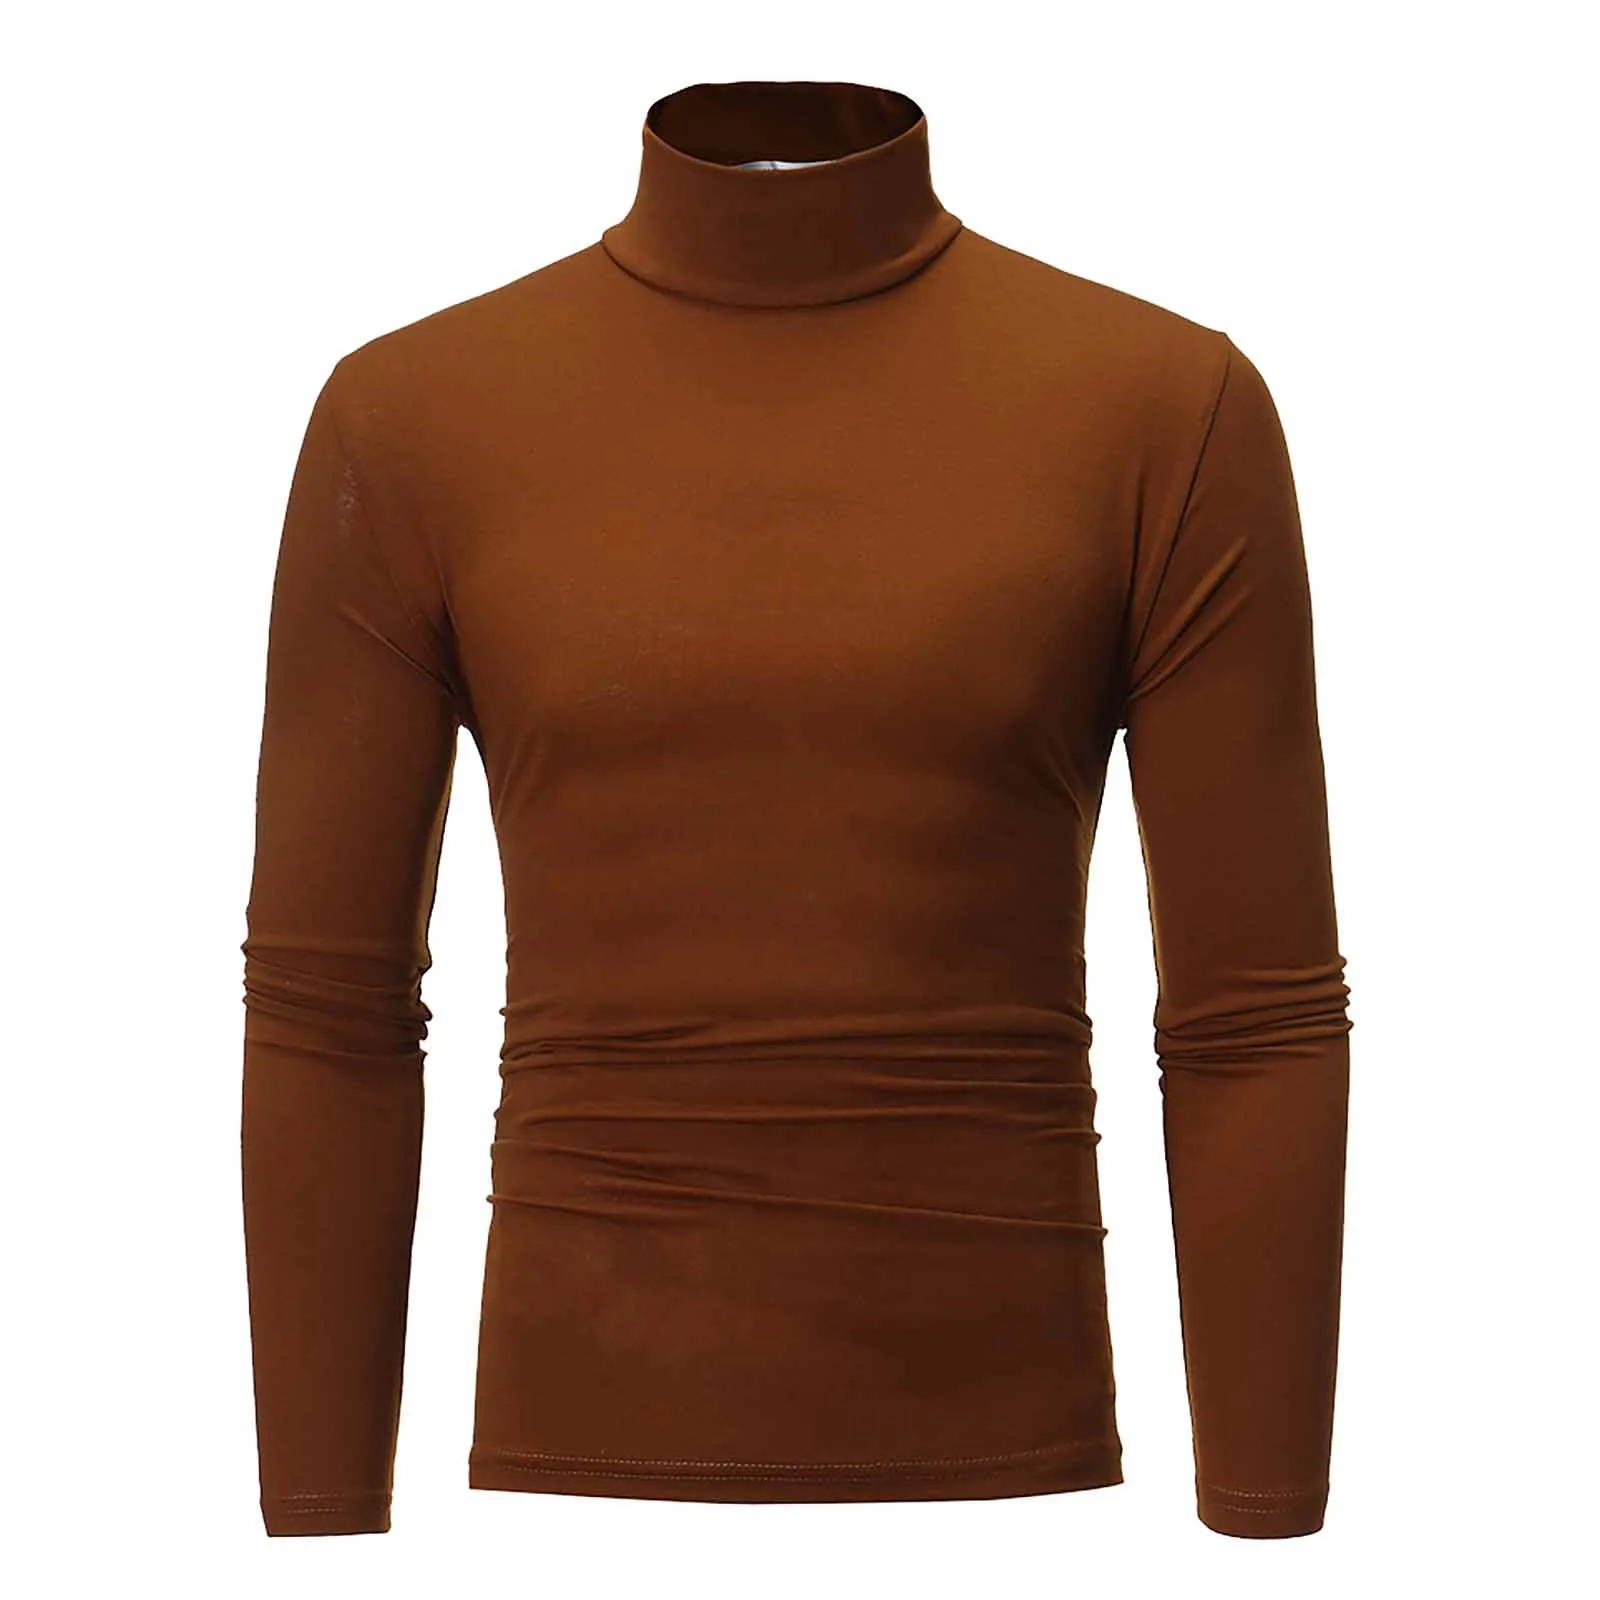 formal sweater for men Fashion Men's Casual Slim Fit Basic Turtleneck Knitted Sweater High Collar Pullover Male Double Collar Autumn Winter Tops brown sweater men